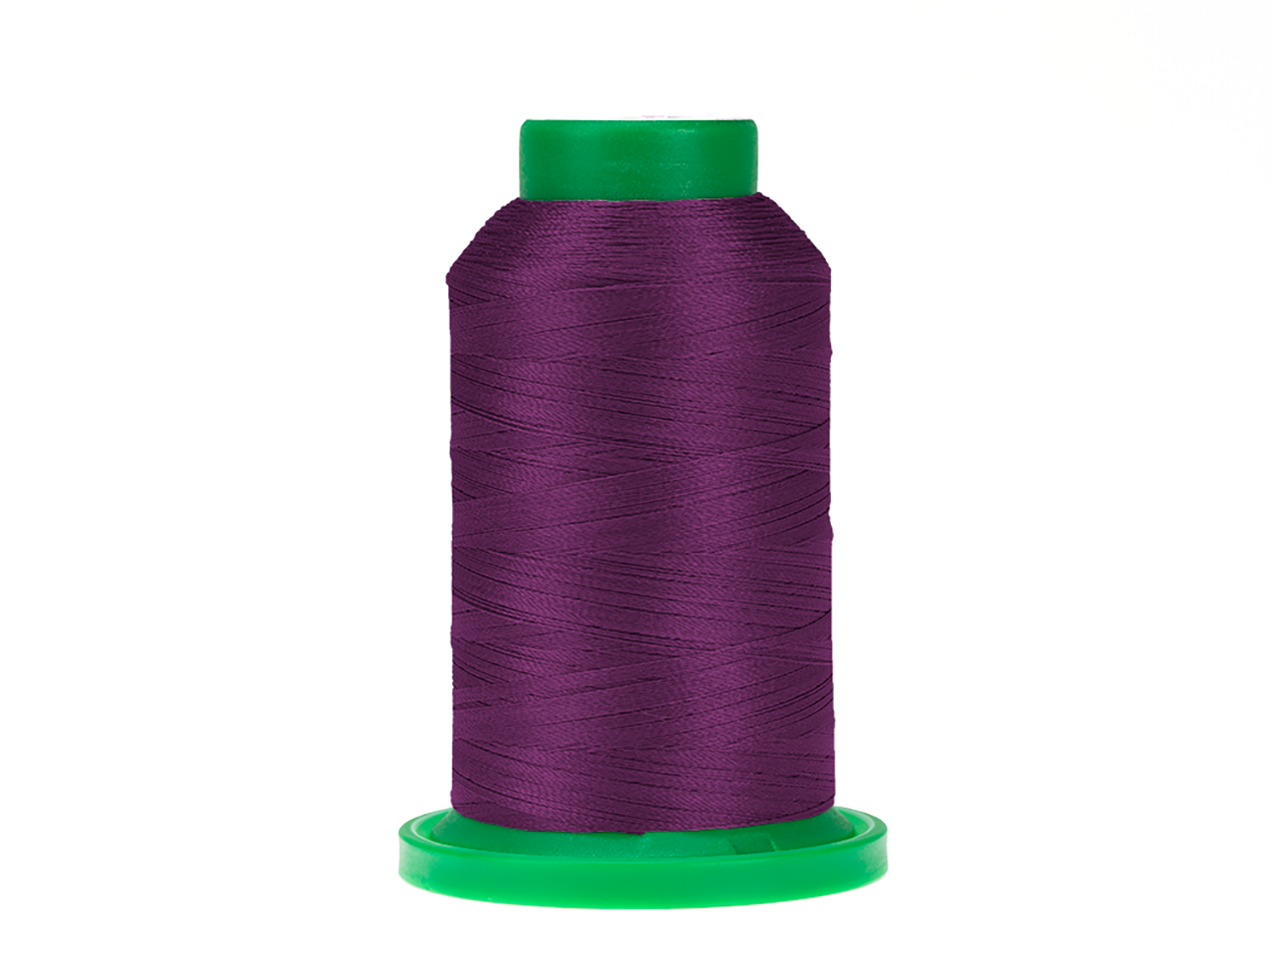 Isacord - A2600 - Dusty Grape - 5000m